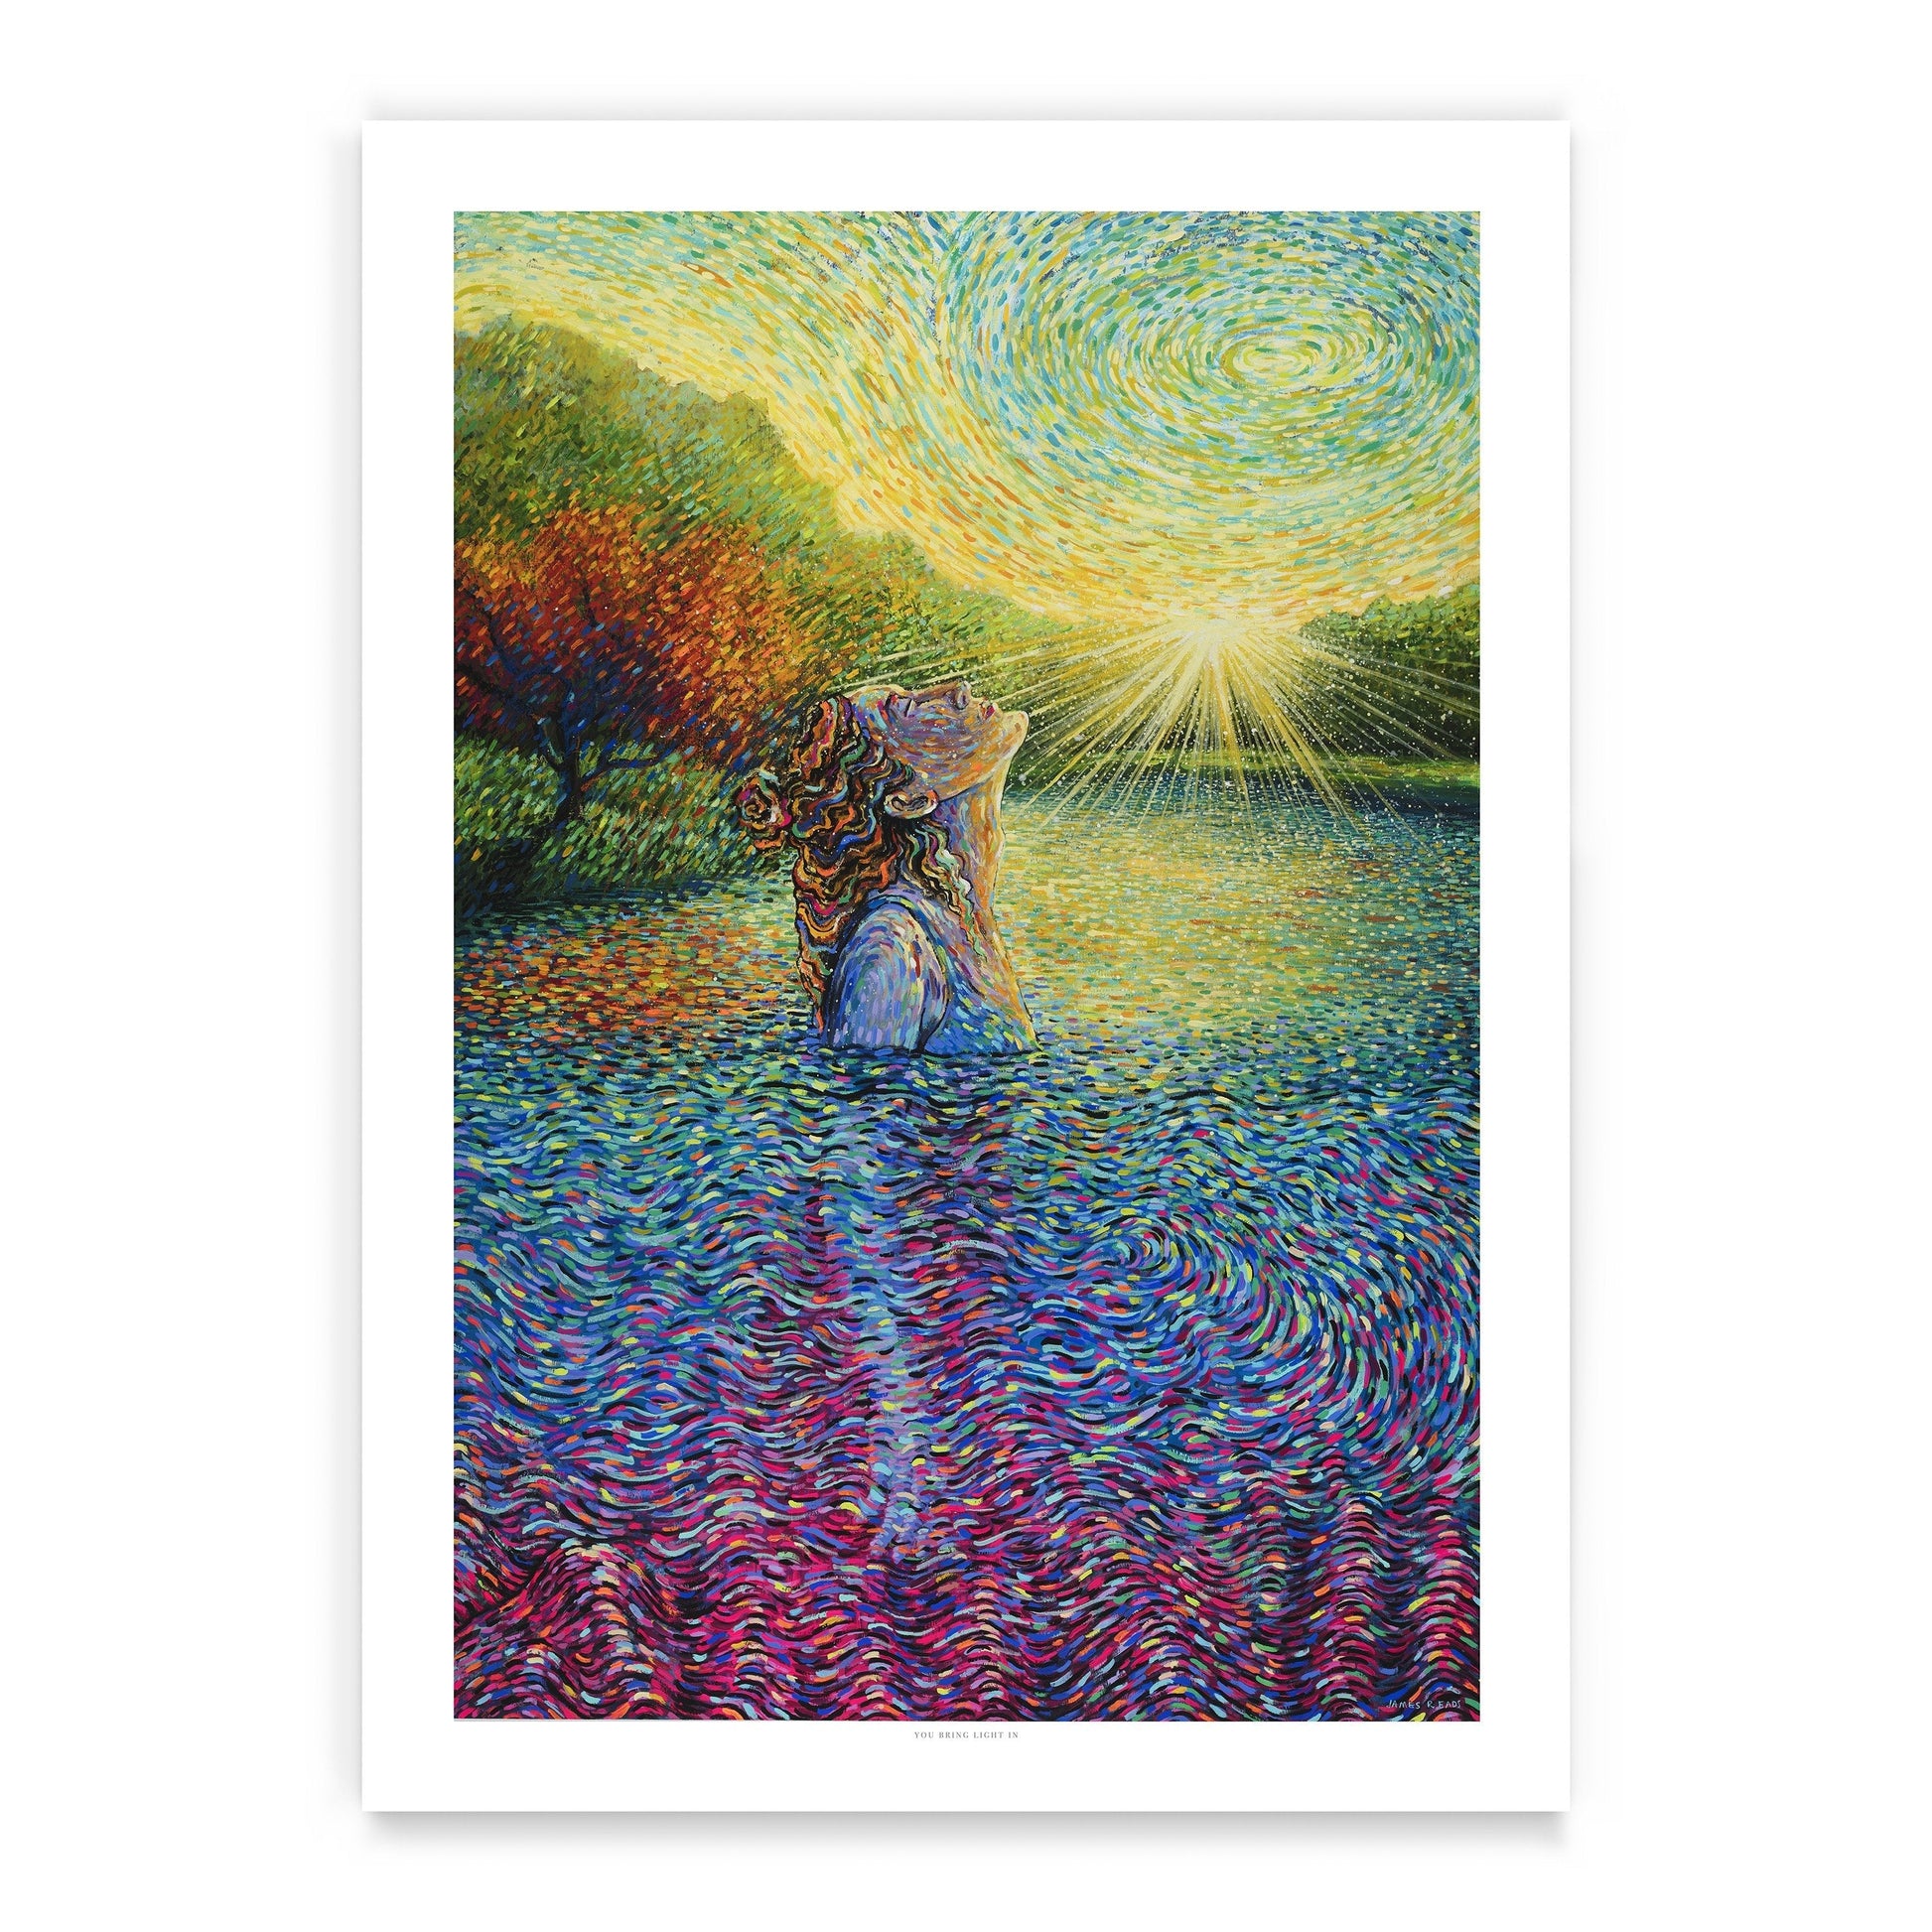 You Bring Light In (MP) Print James R. Eads 